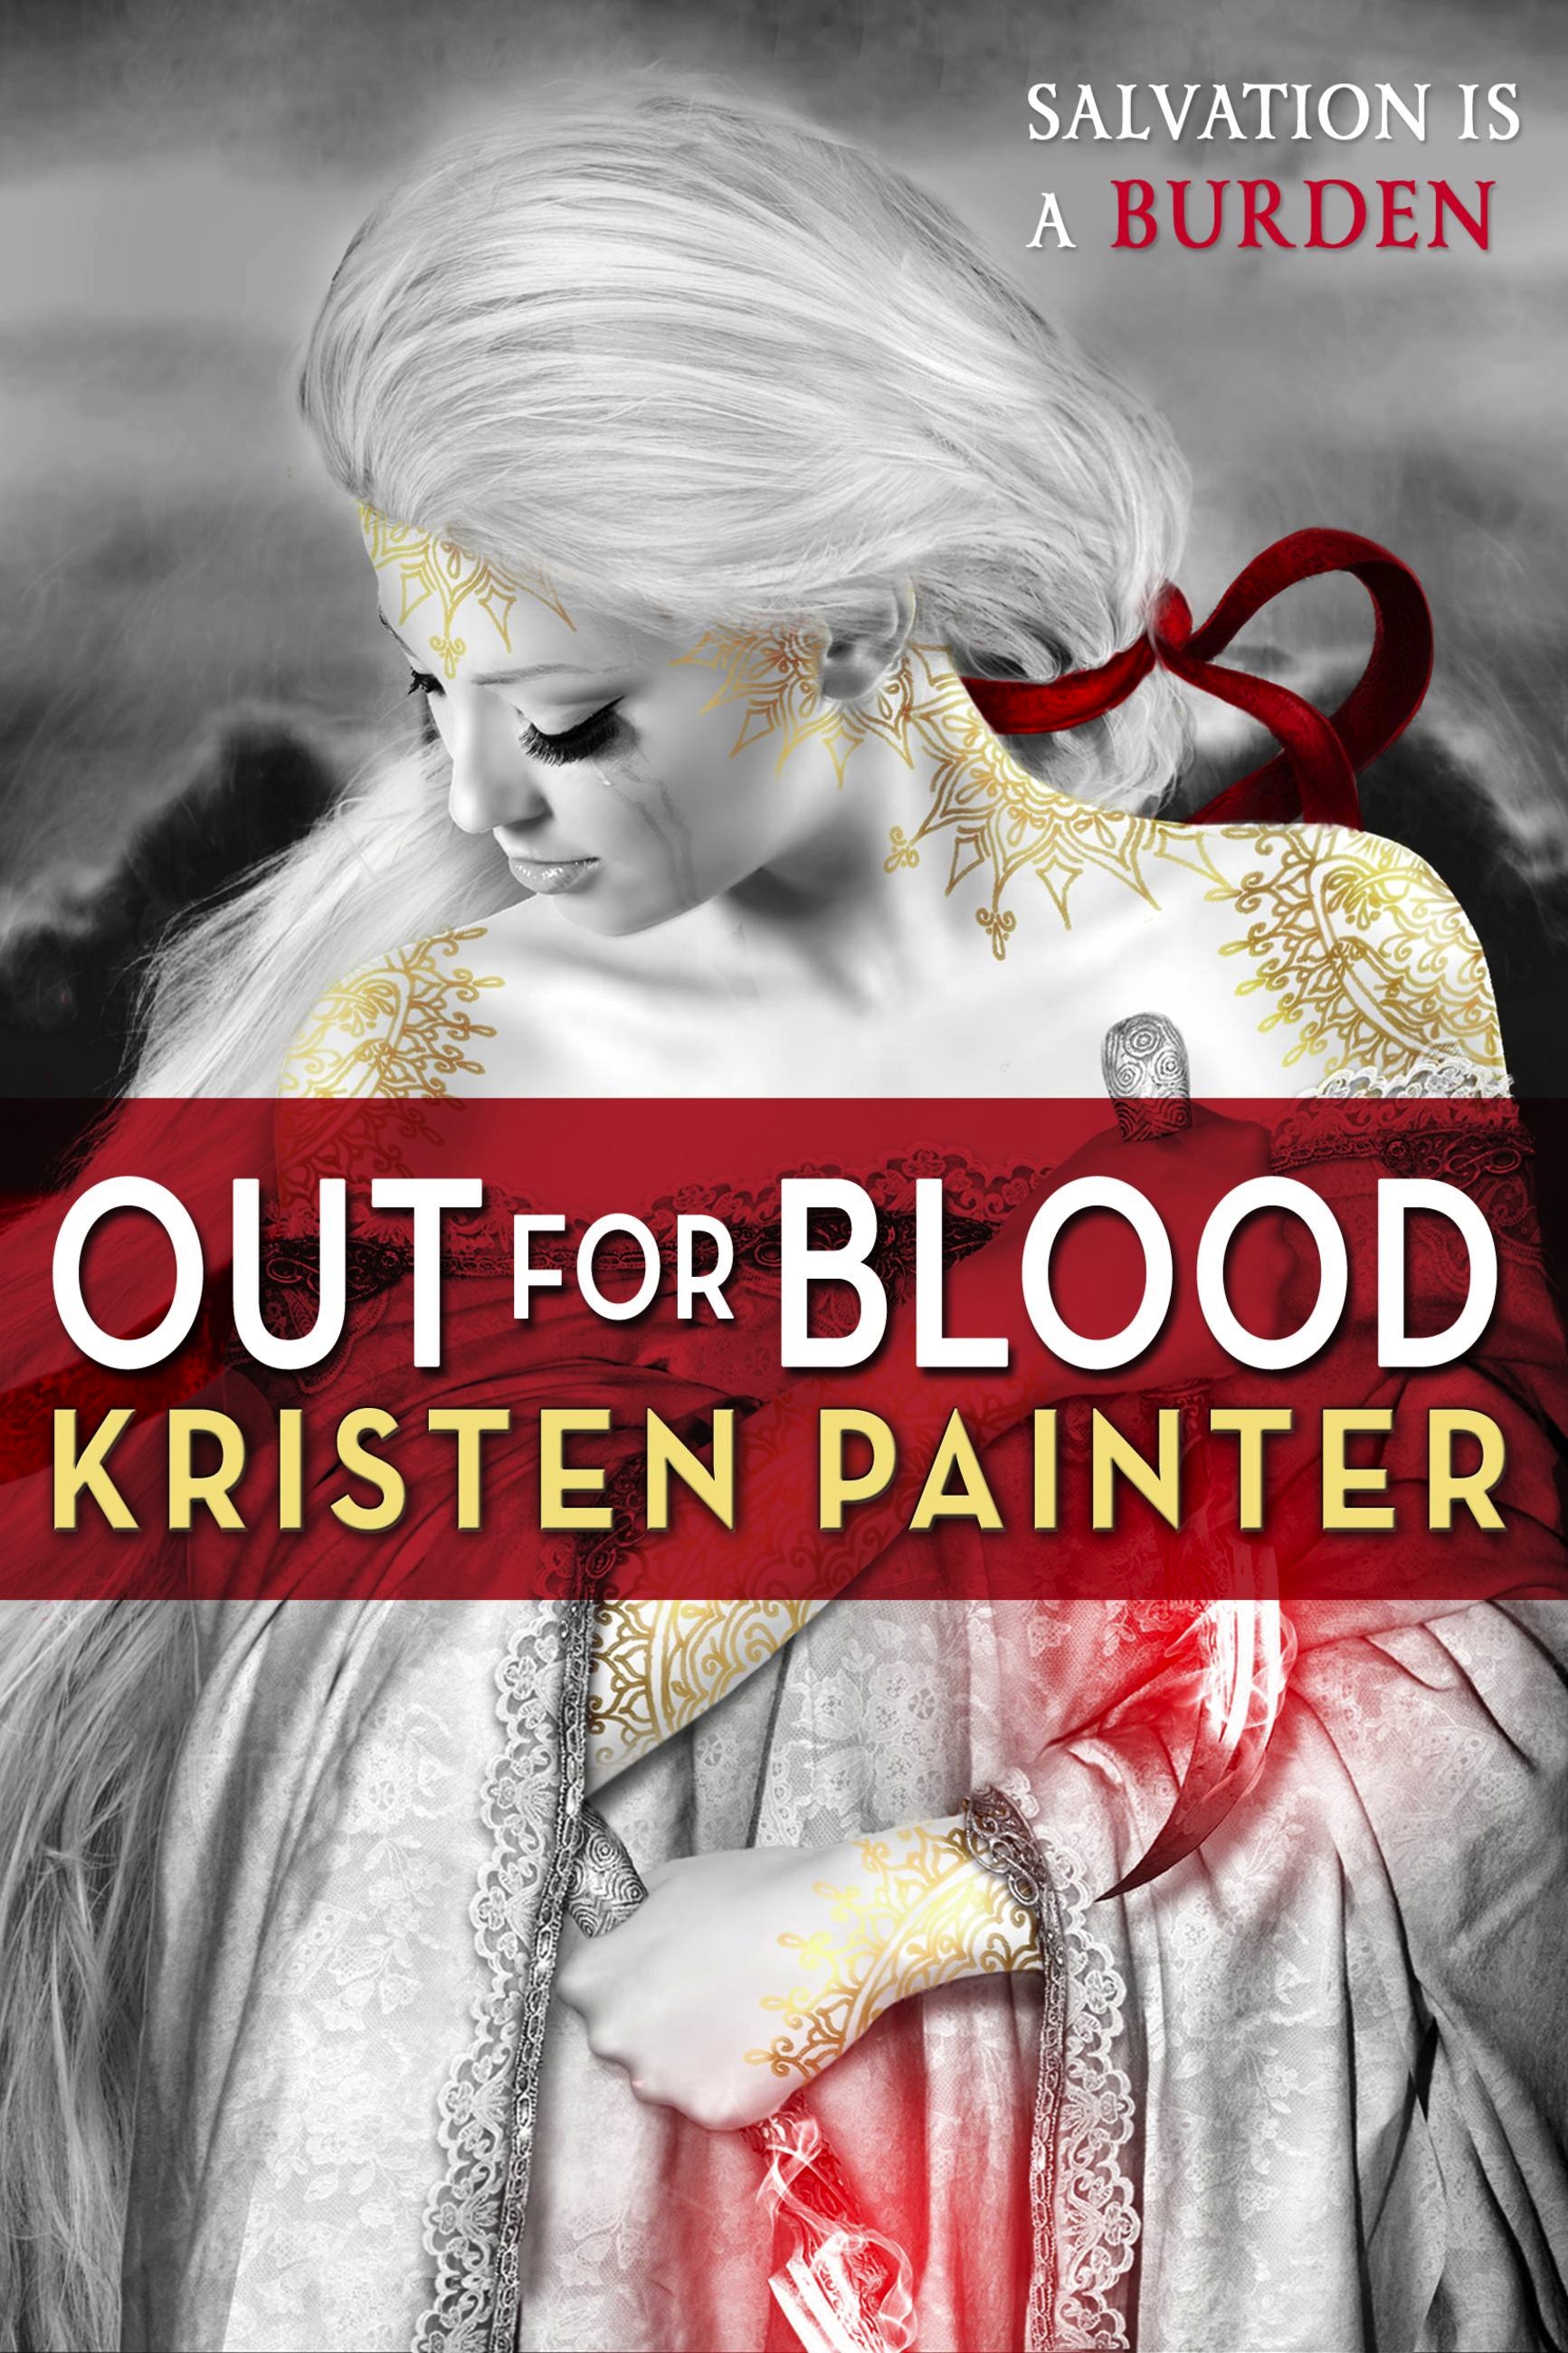 Out for Blood by Alyxandra Harvey